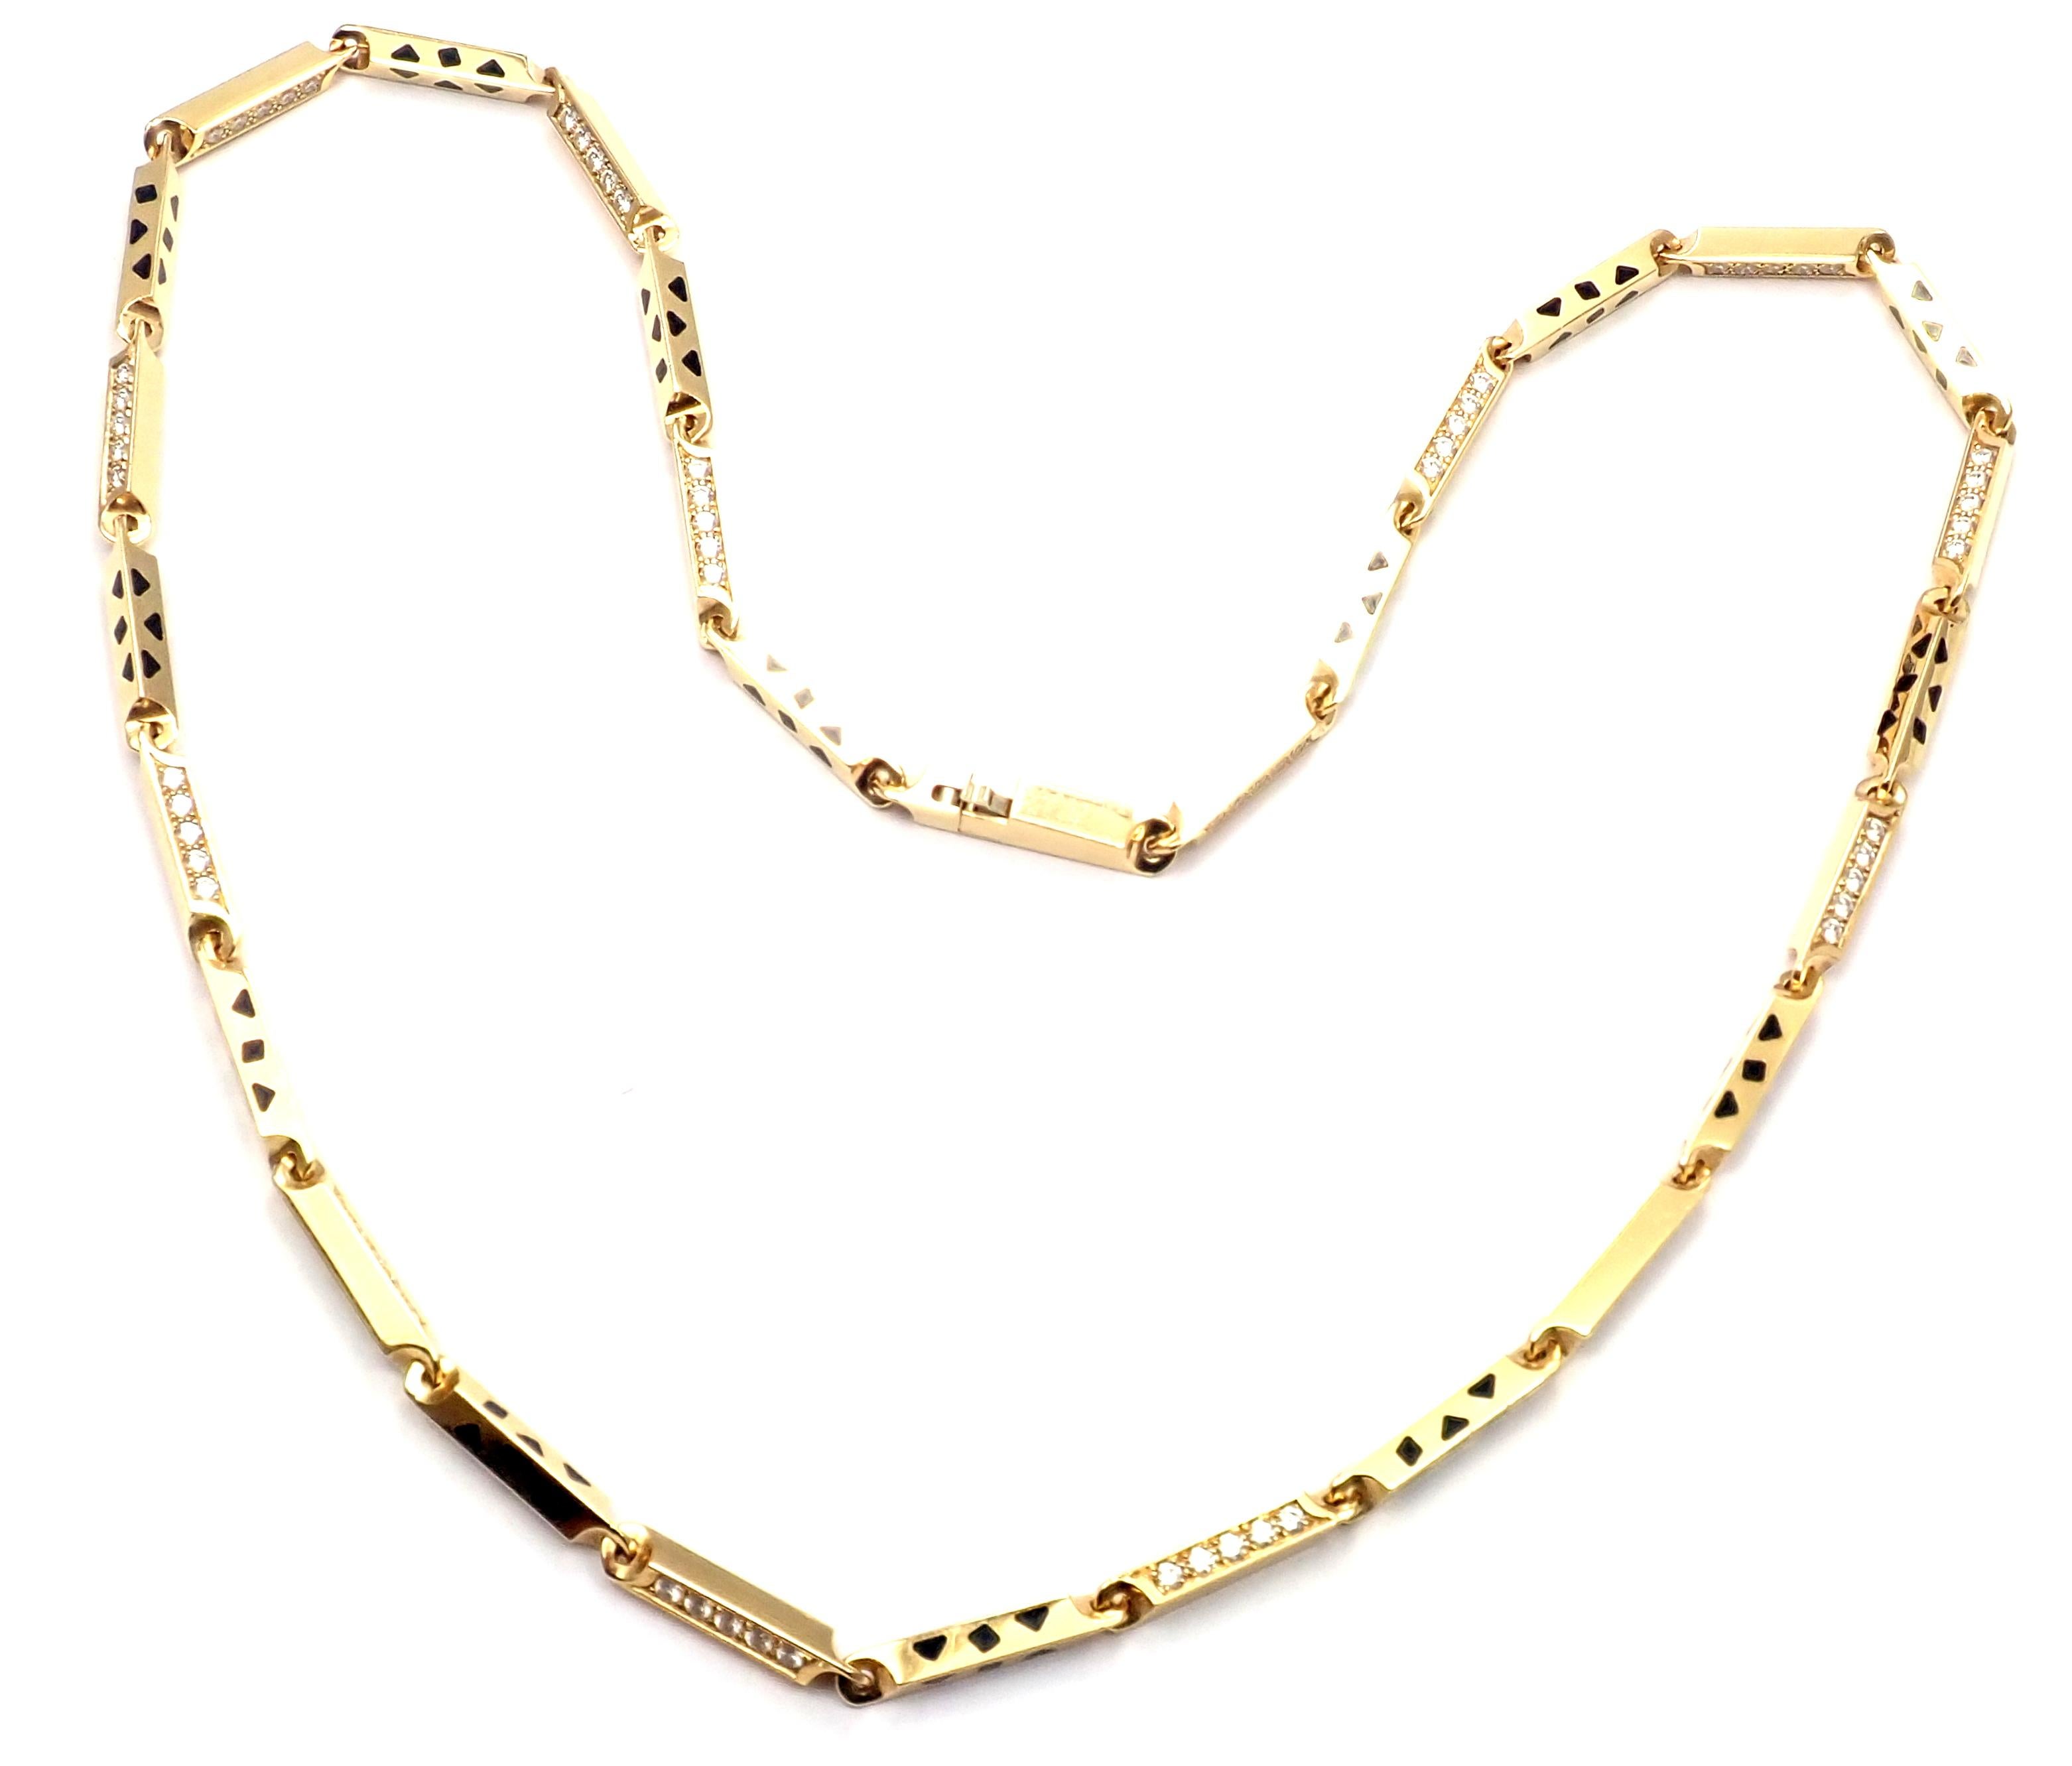 18k Yellow Gold Diamond Lacquer Panther Panthere Link Necklace by Cartier. 
With 140 Round brilliant cut diamonds VVS1 clarity E color total weight approx. 2.80ct
Details:
Length: 18